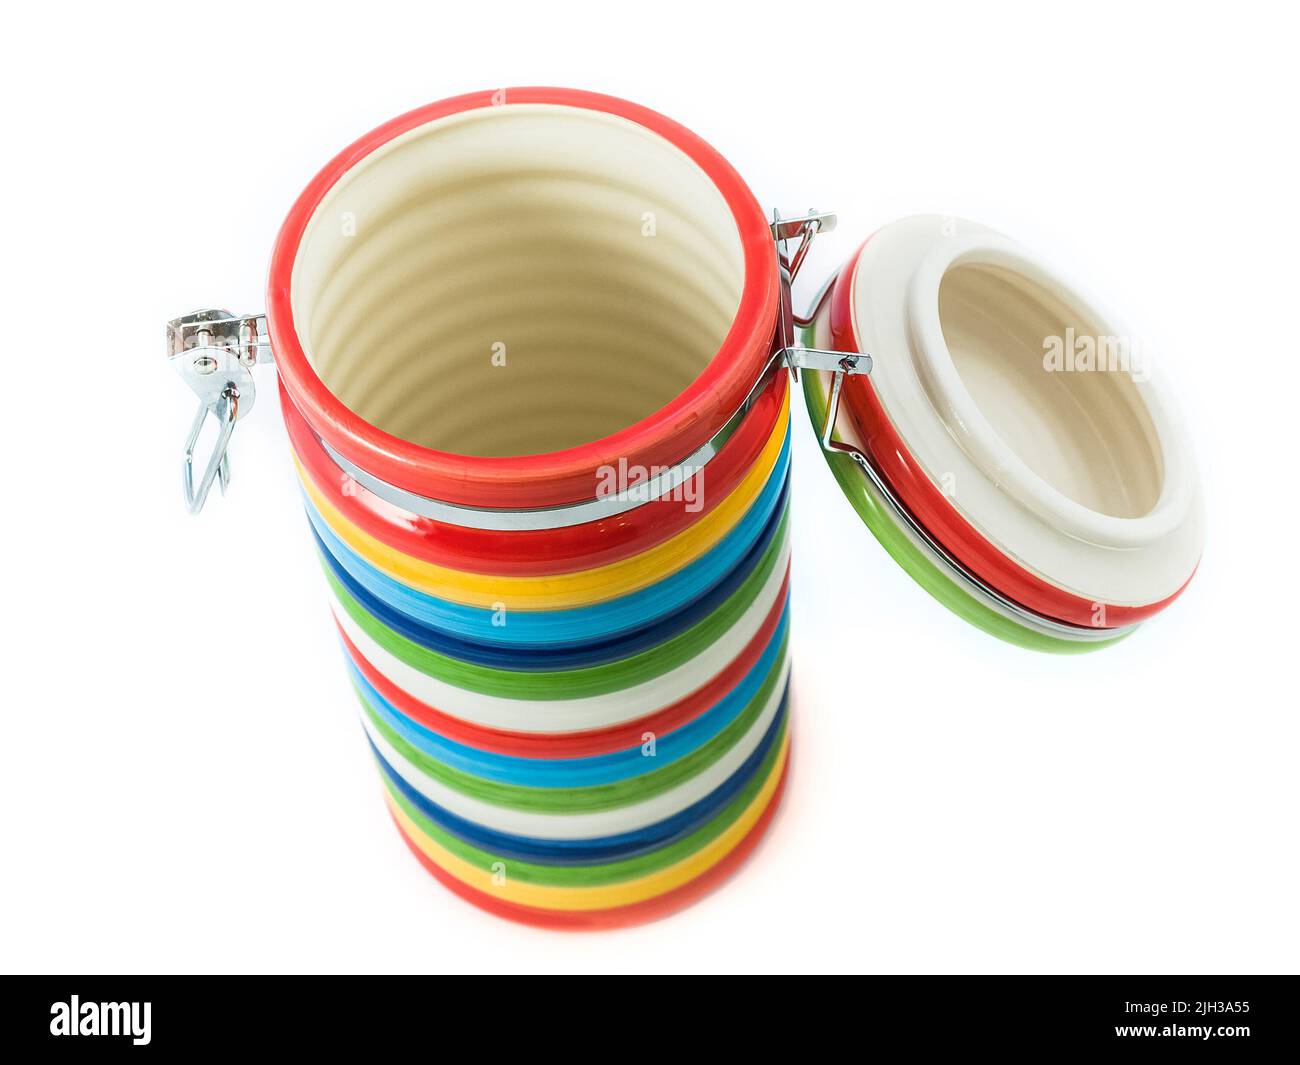 Colorful ceramic pot with locked lid Stock Photo